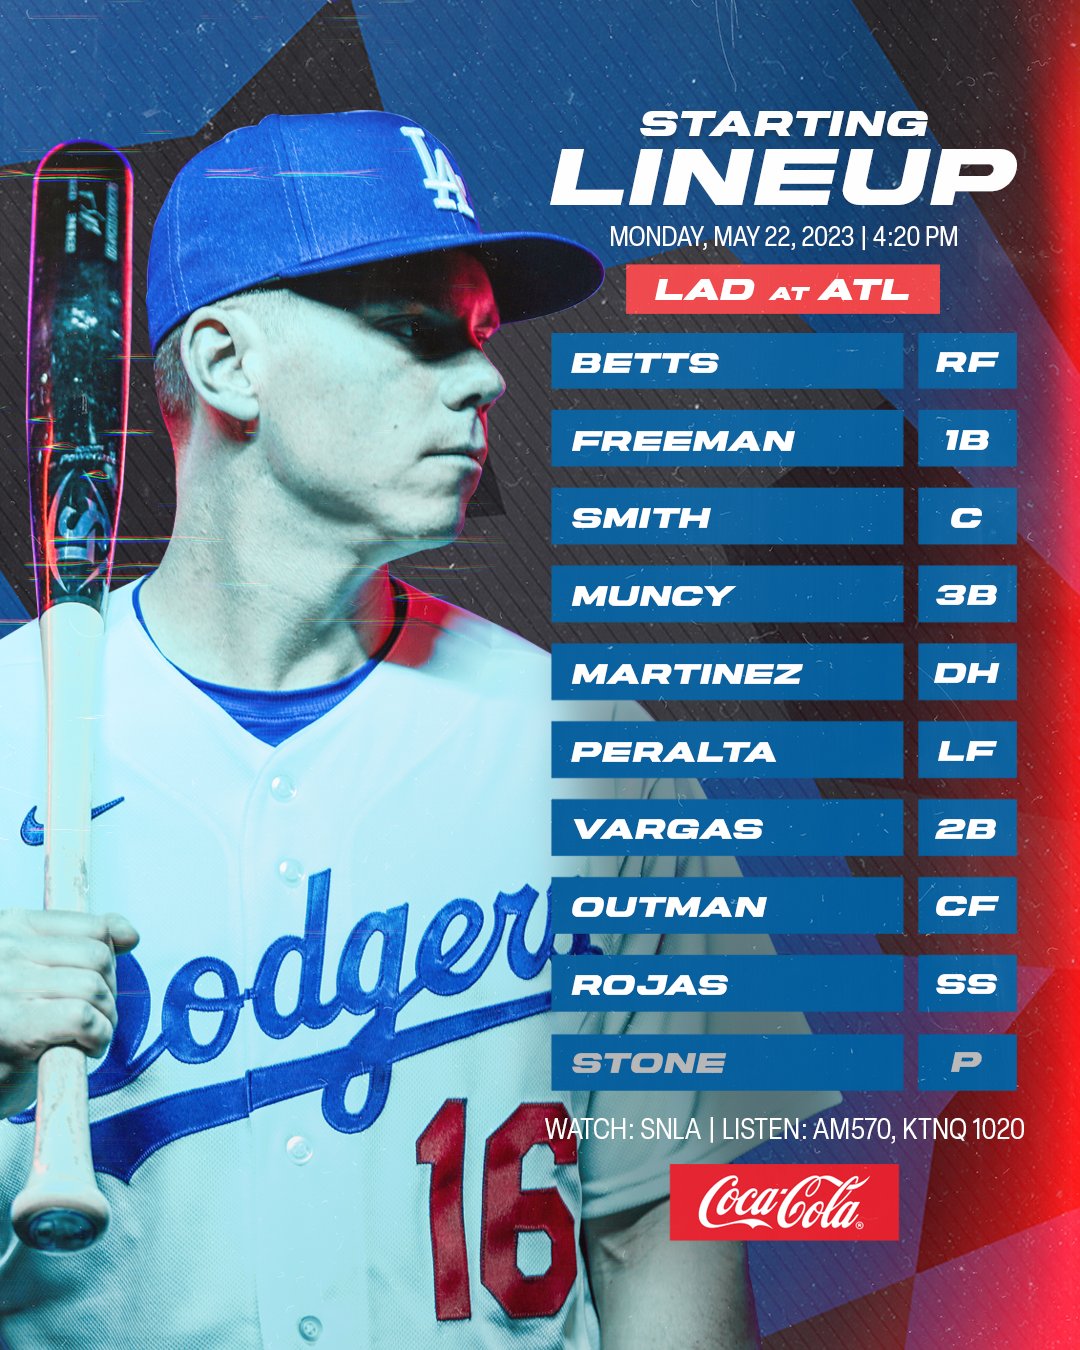 Los Angeles Dodgers on Twitter "Today's Dodgers lineup at Braves